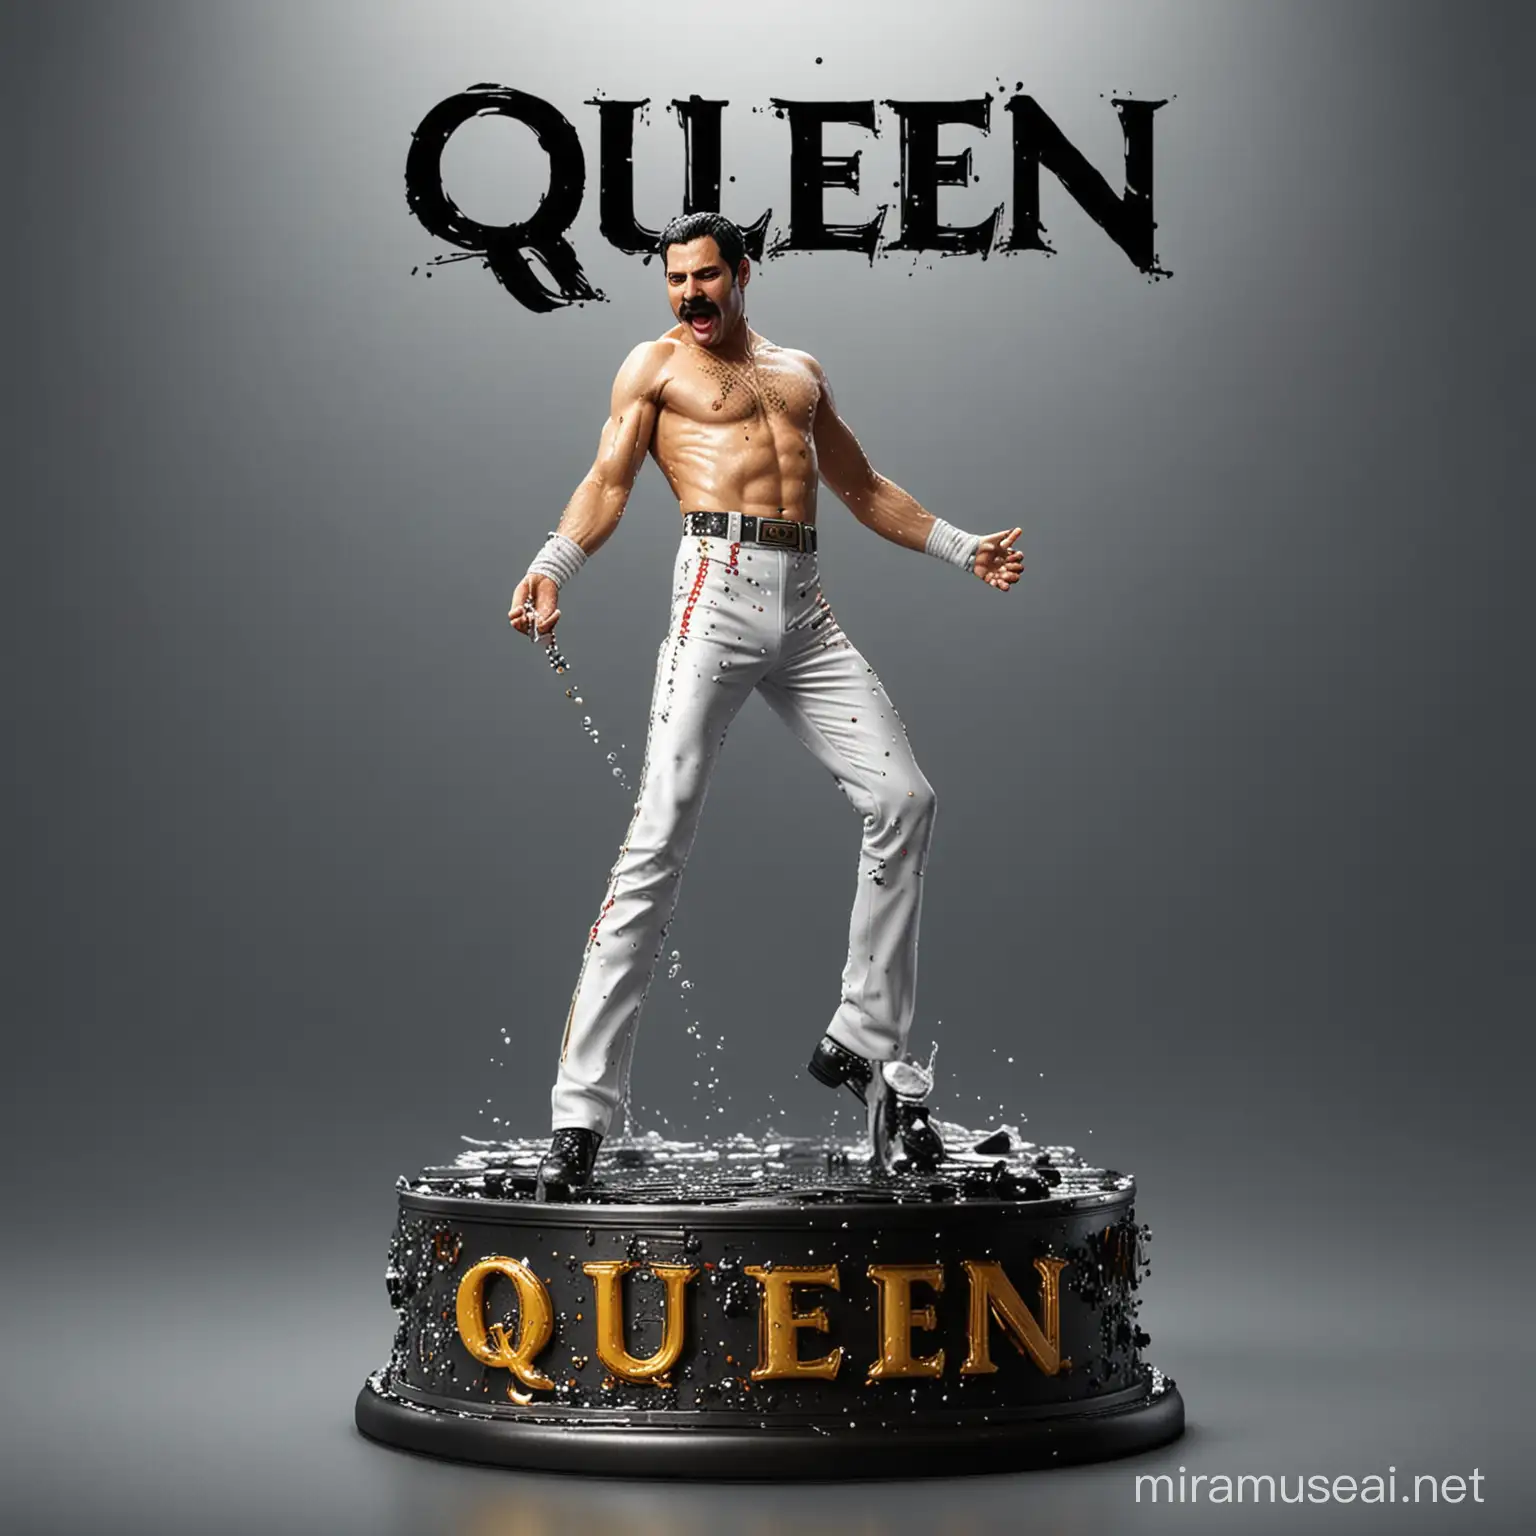 freddie mercury from queen Band in action, On a metal base with the phrase "queen" on the base, with splash effect, ultra-realistic, 16k